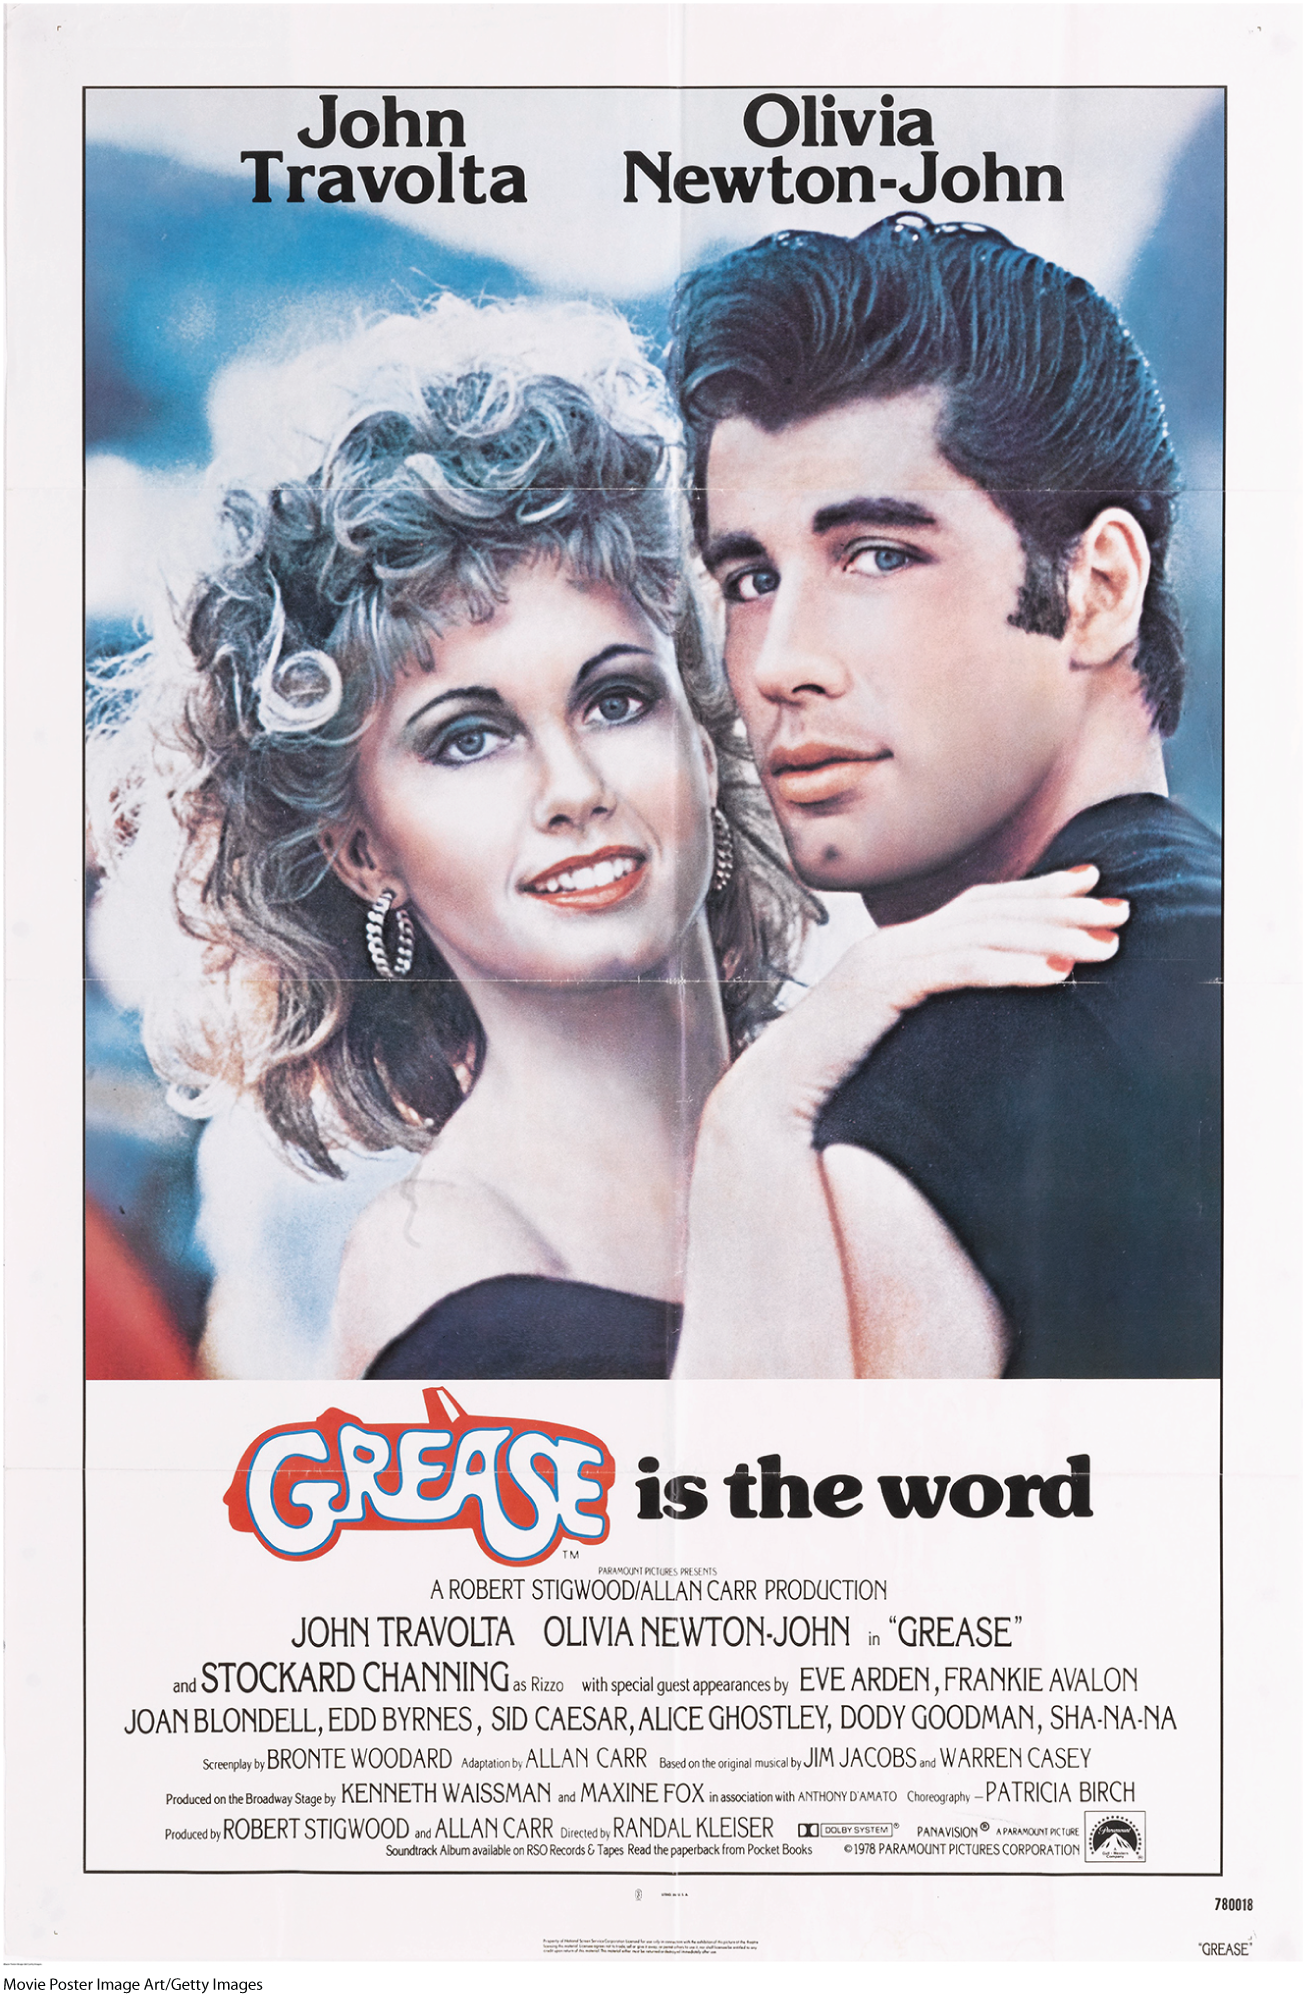 The film poster shows the two lead actors, John Travolta and Olivia Newton John, looking towards the camera and smiling.